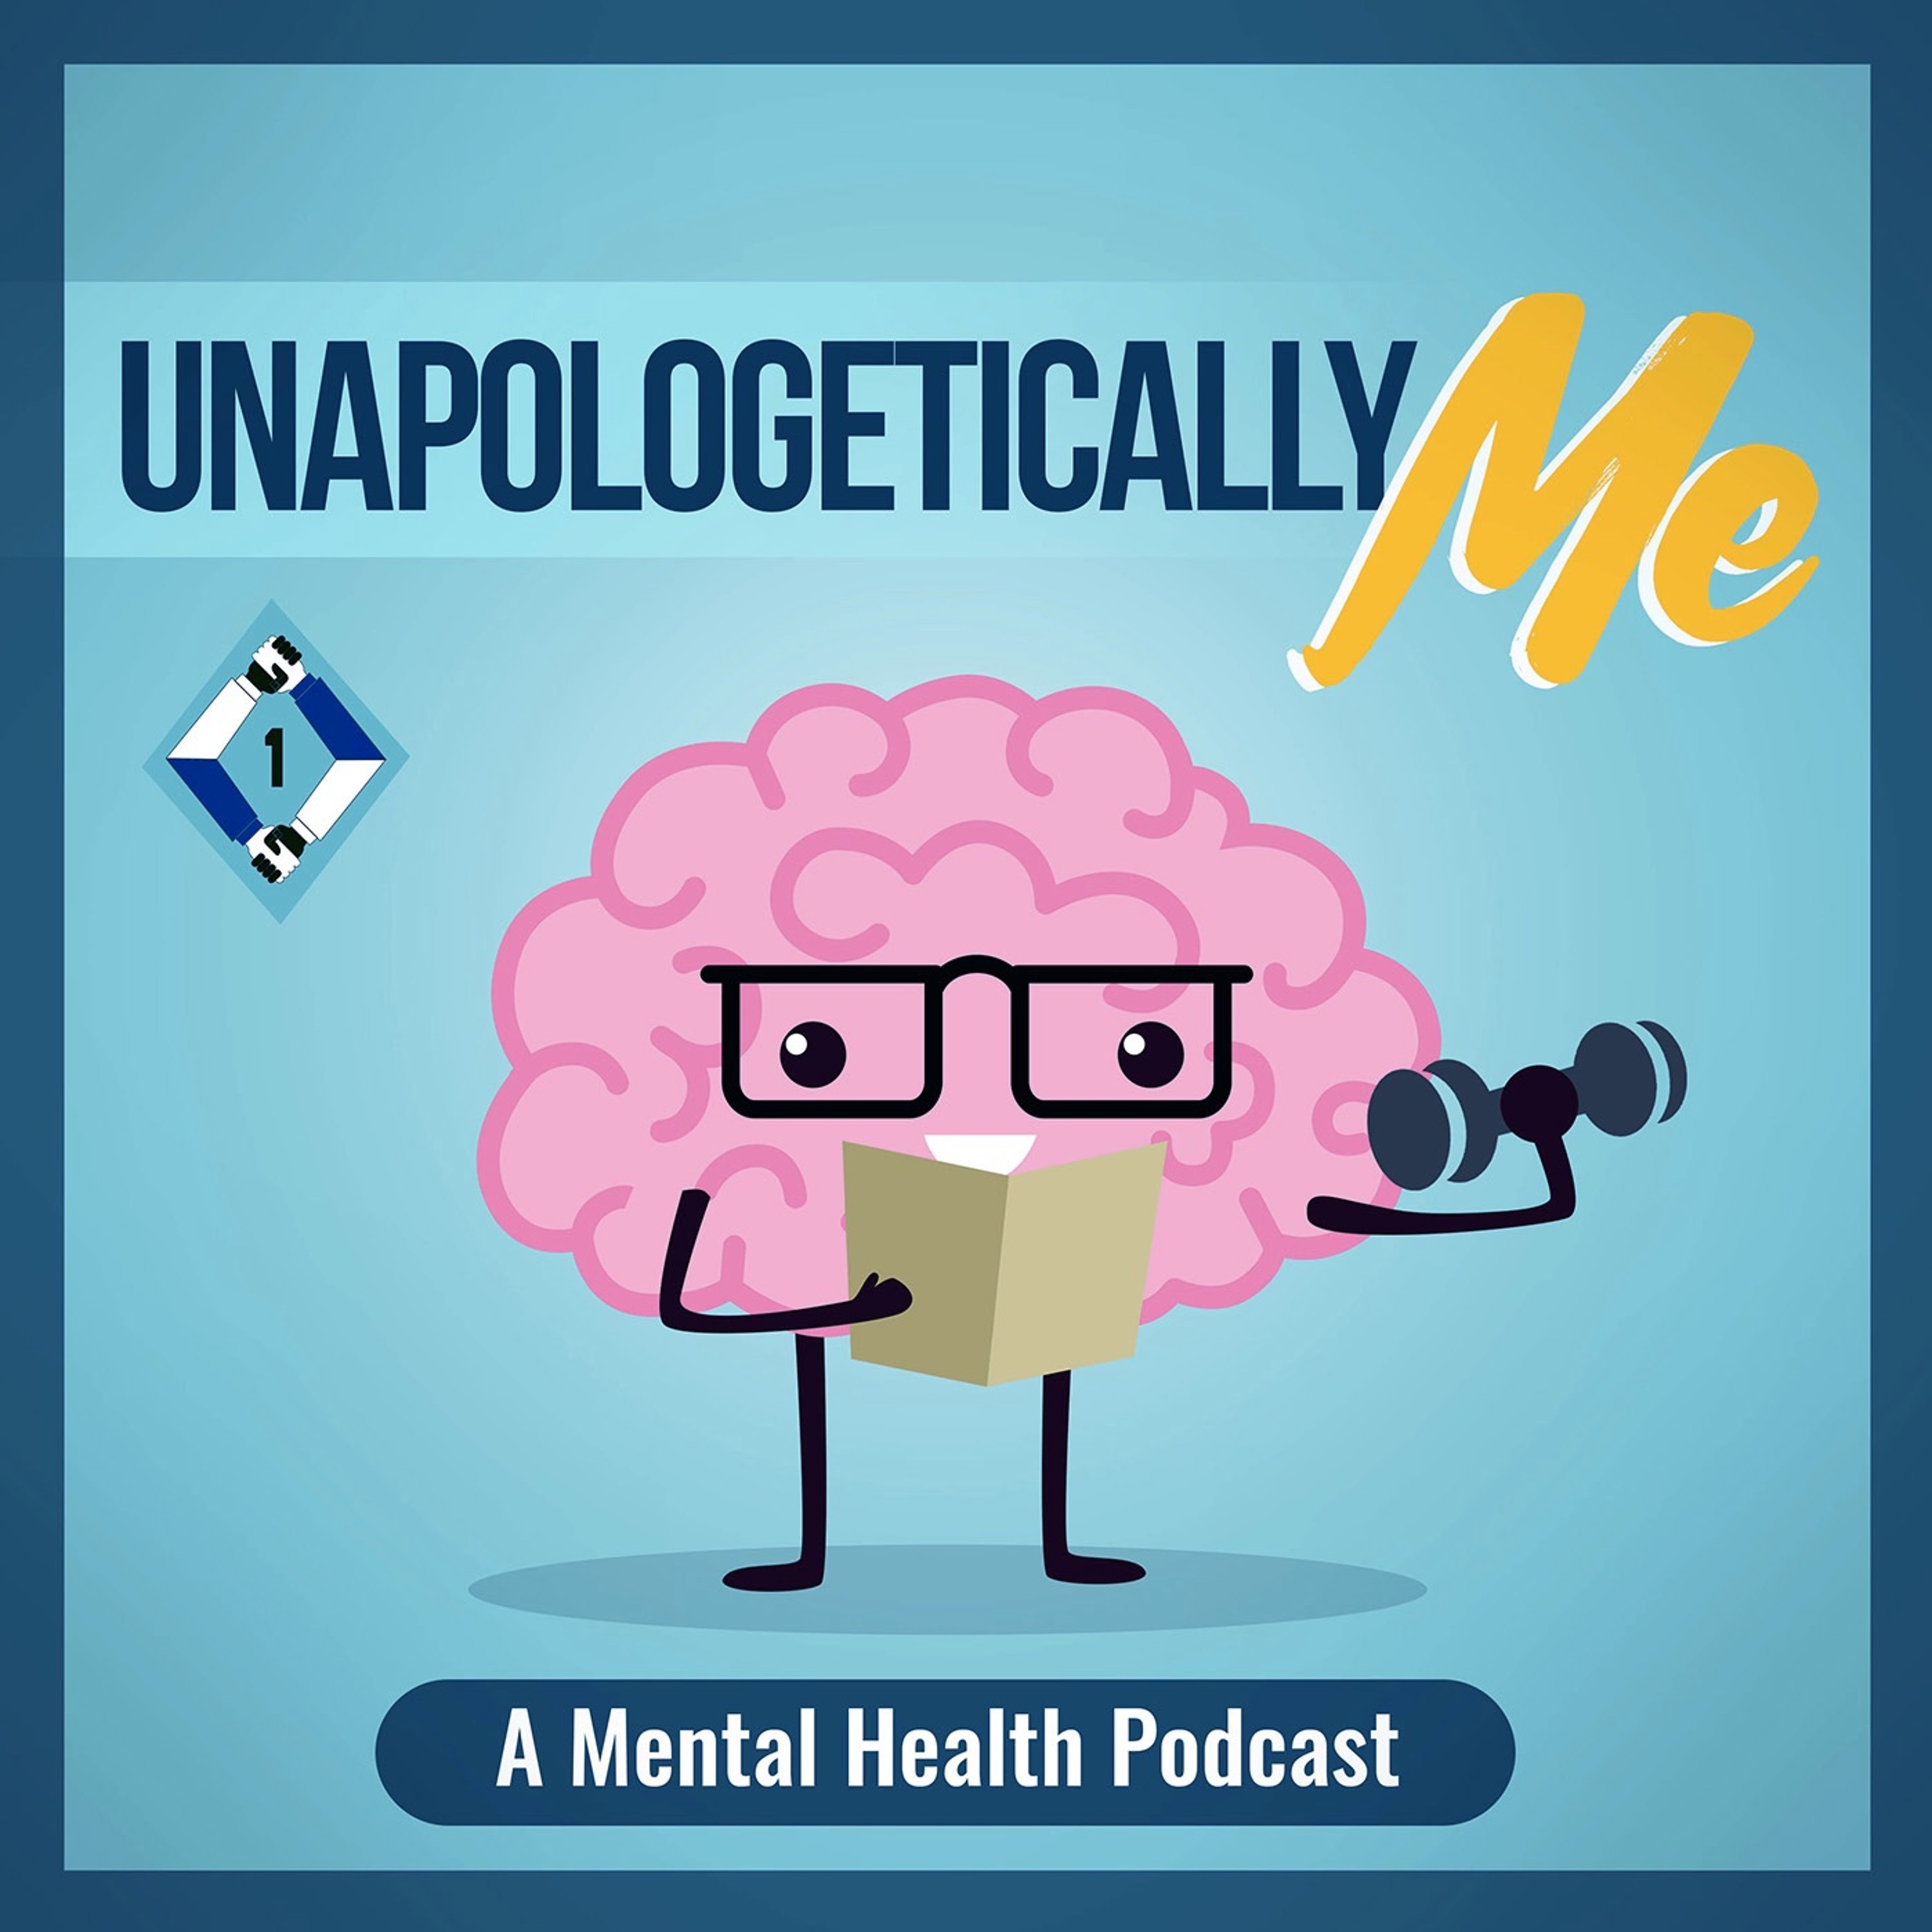 Unapologetically Me: A Mental Health Podcast - BPD And PTSD